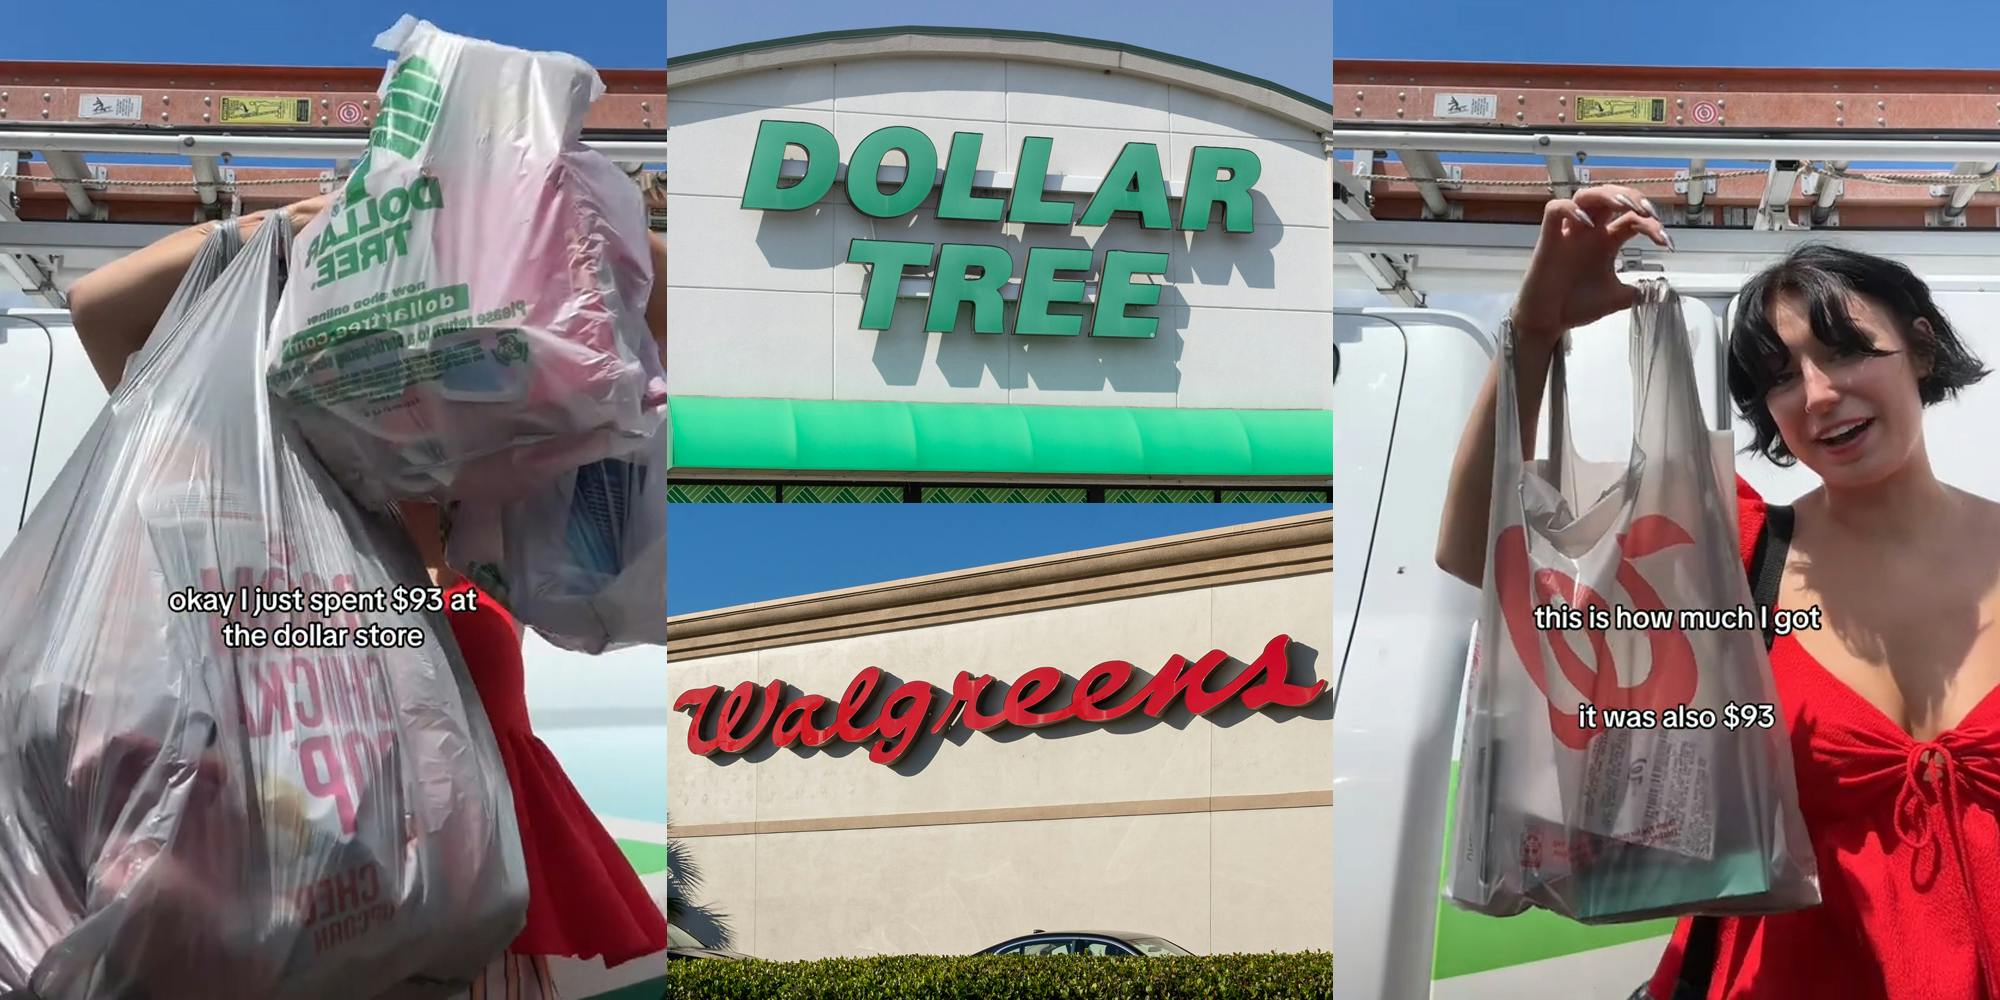 shopper with Dollar Tree bags with caption "Okay I just spent $93 at the dollar store" (l) Dollar Tre sign above Walgreens sign (c) shopper with Walgreens bag with caption "this is how much I got it was also $93" (r)